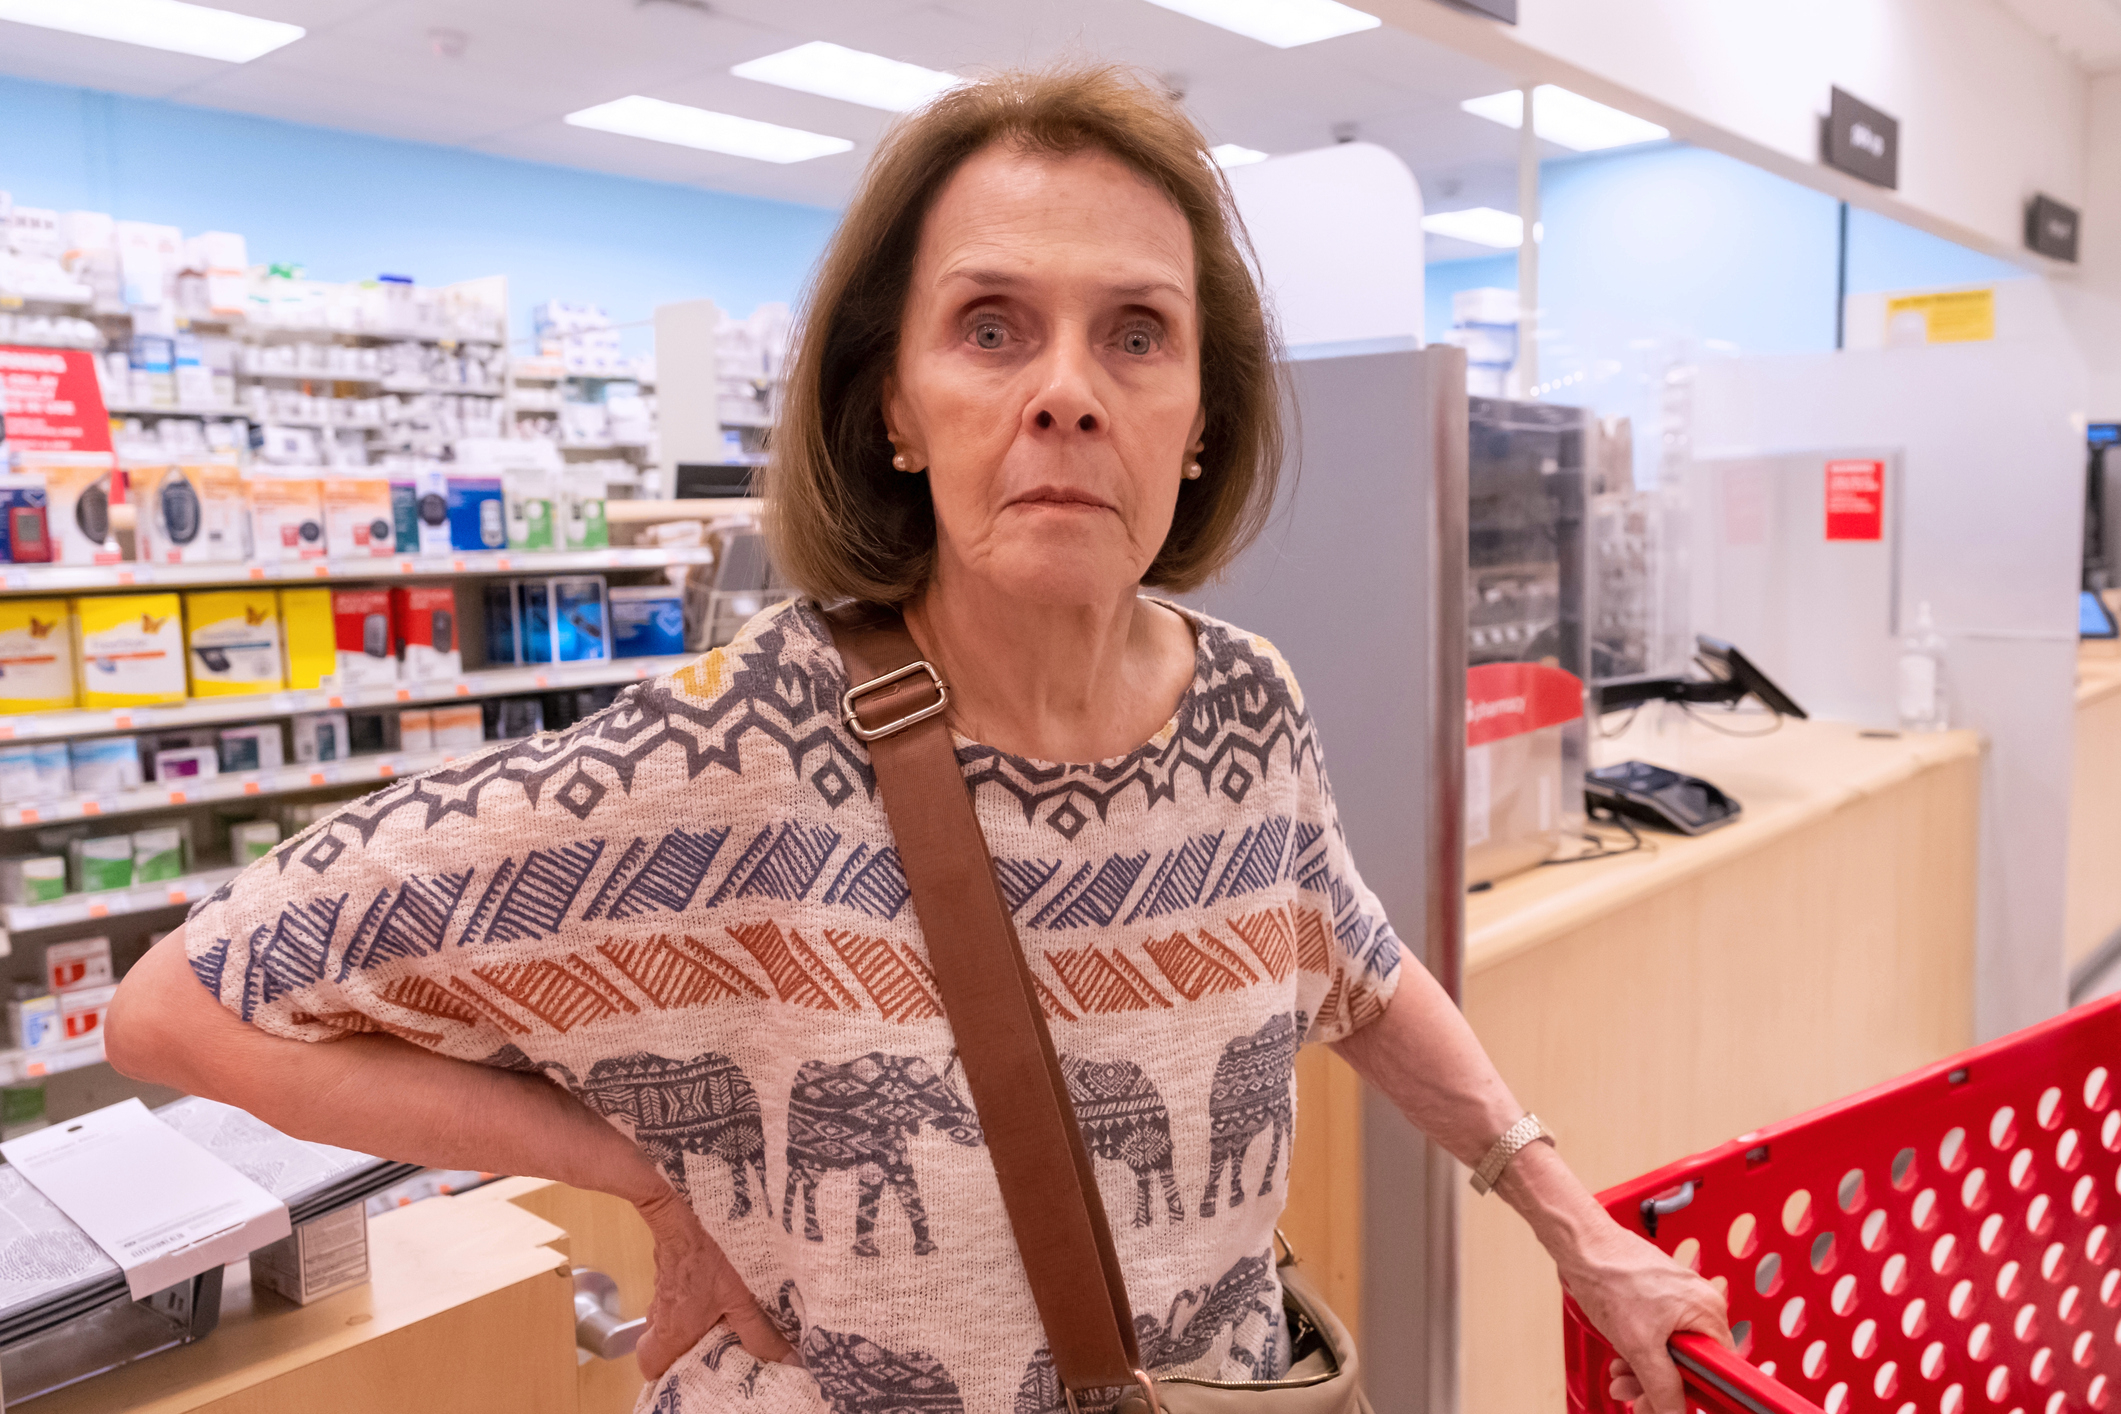 angry woman at a store